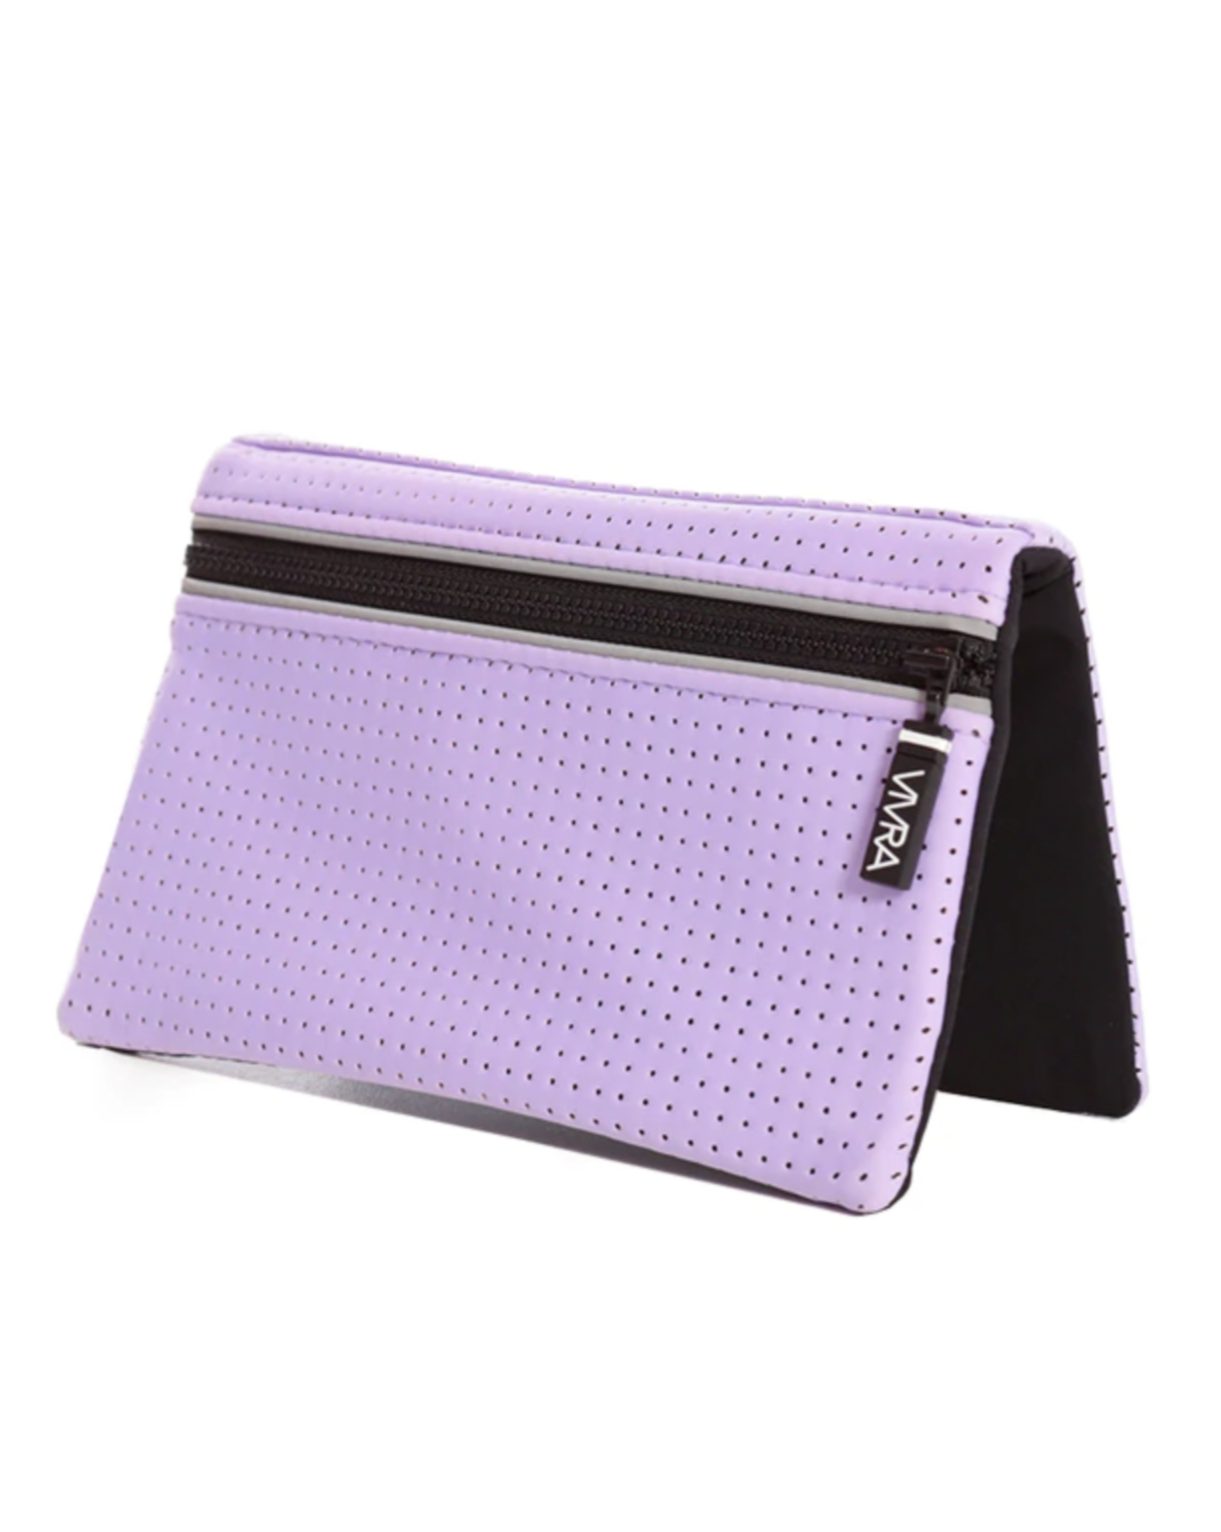 Vivra Base Magnetic Pouch - Lilac Neoprene / Perforated